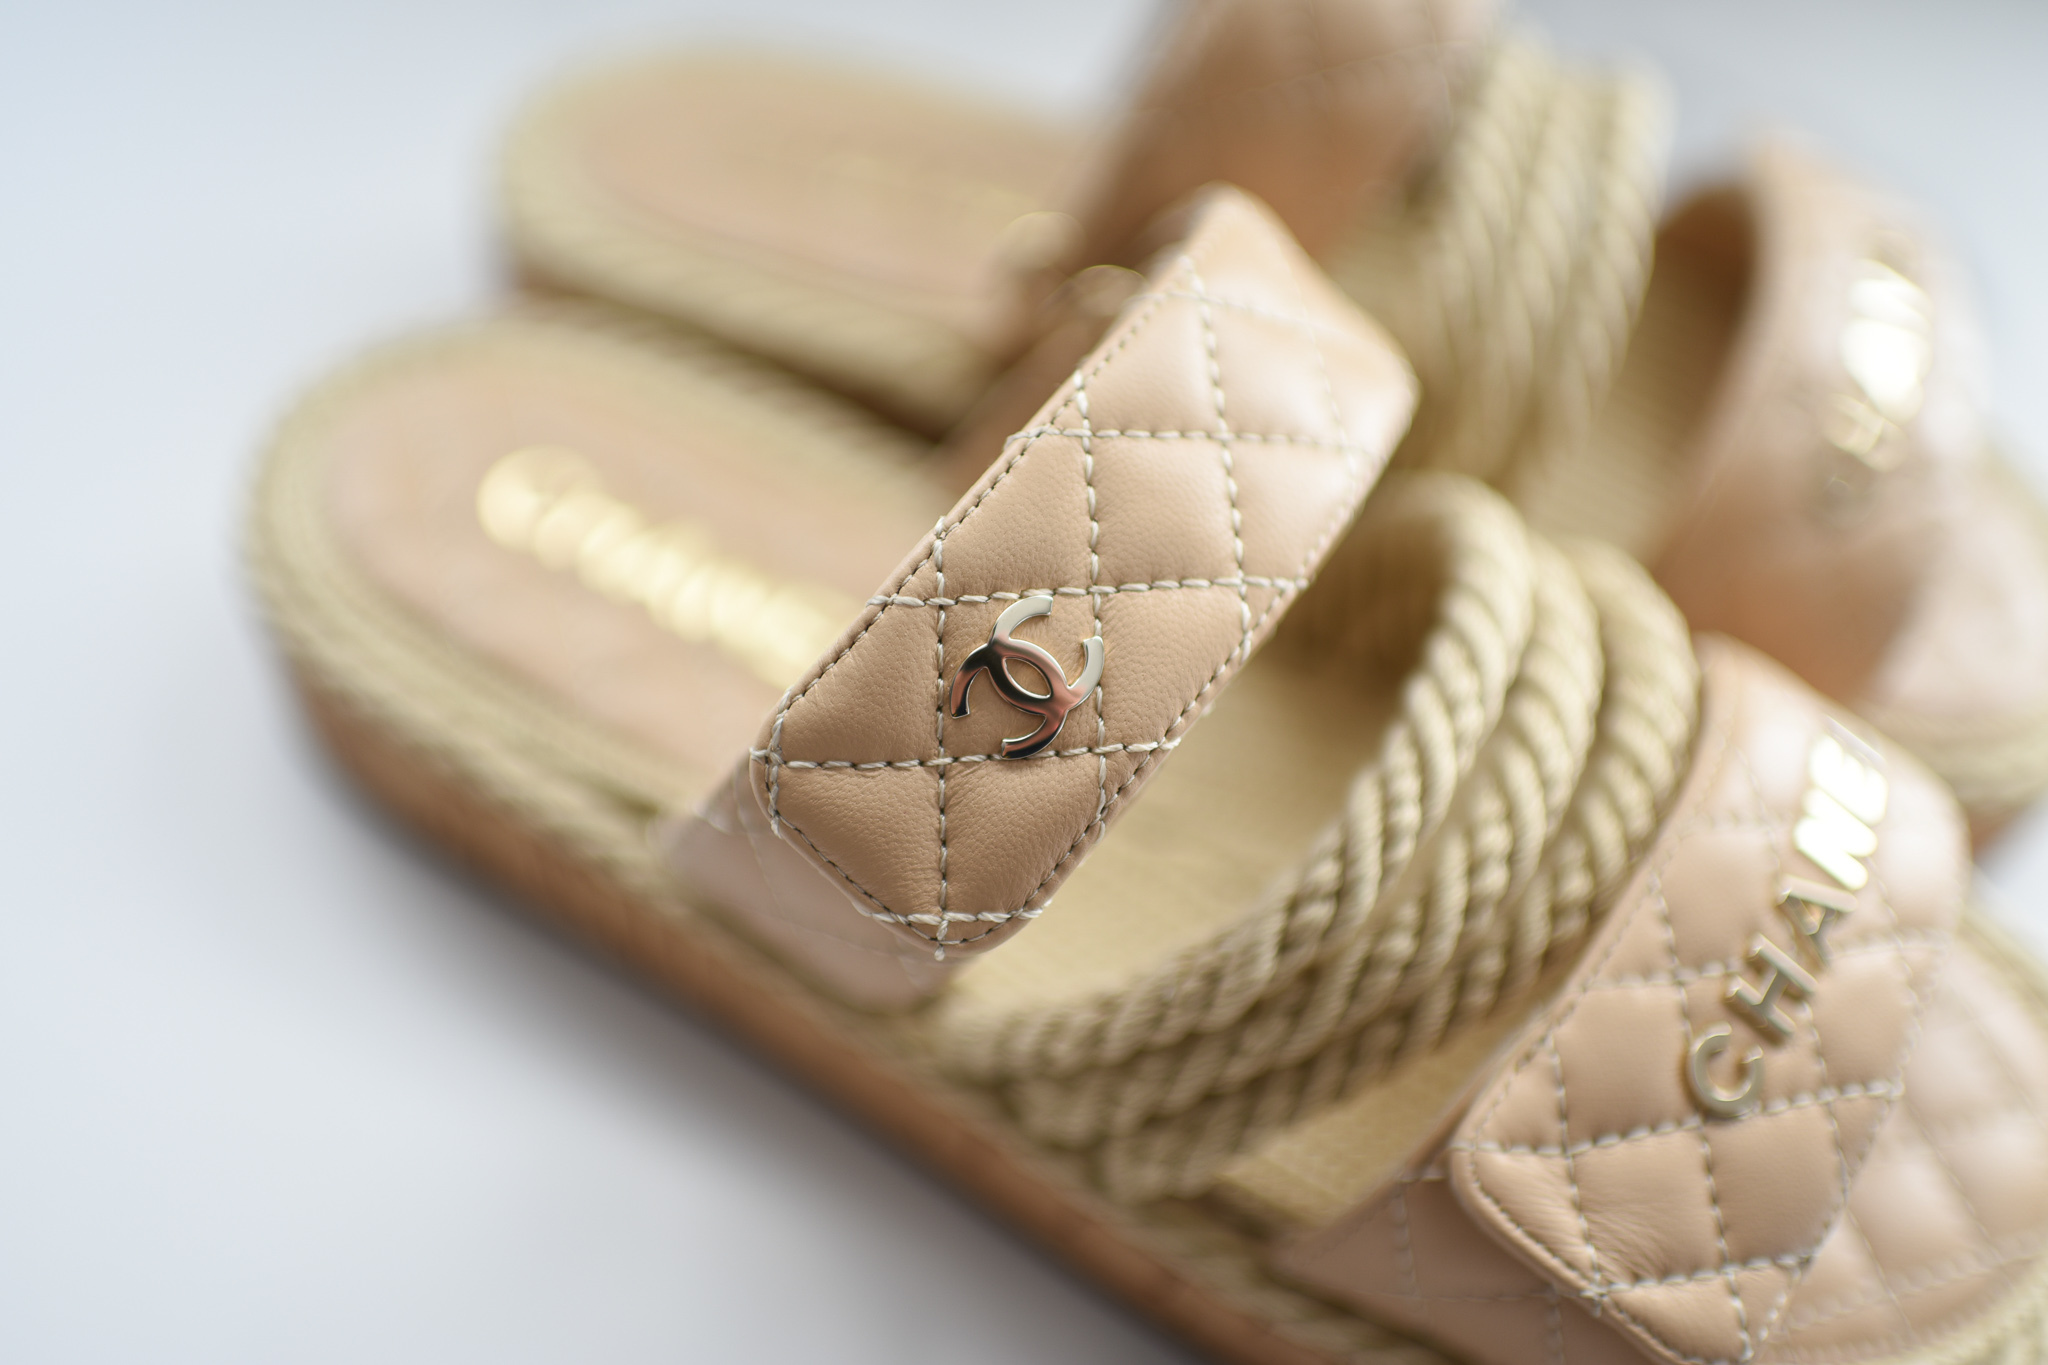 Chanel Rope Sandals, Beige, Size 39, New in Box WA001